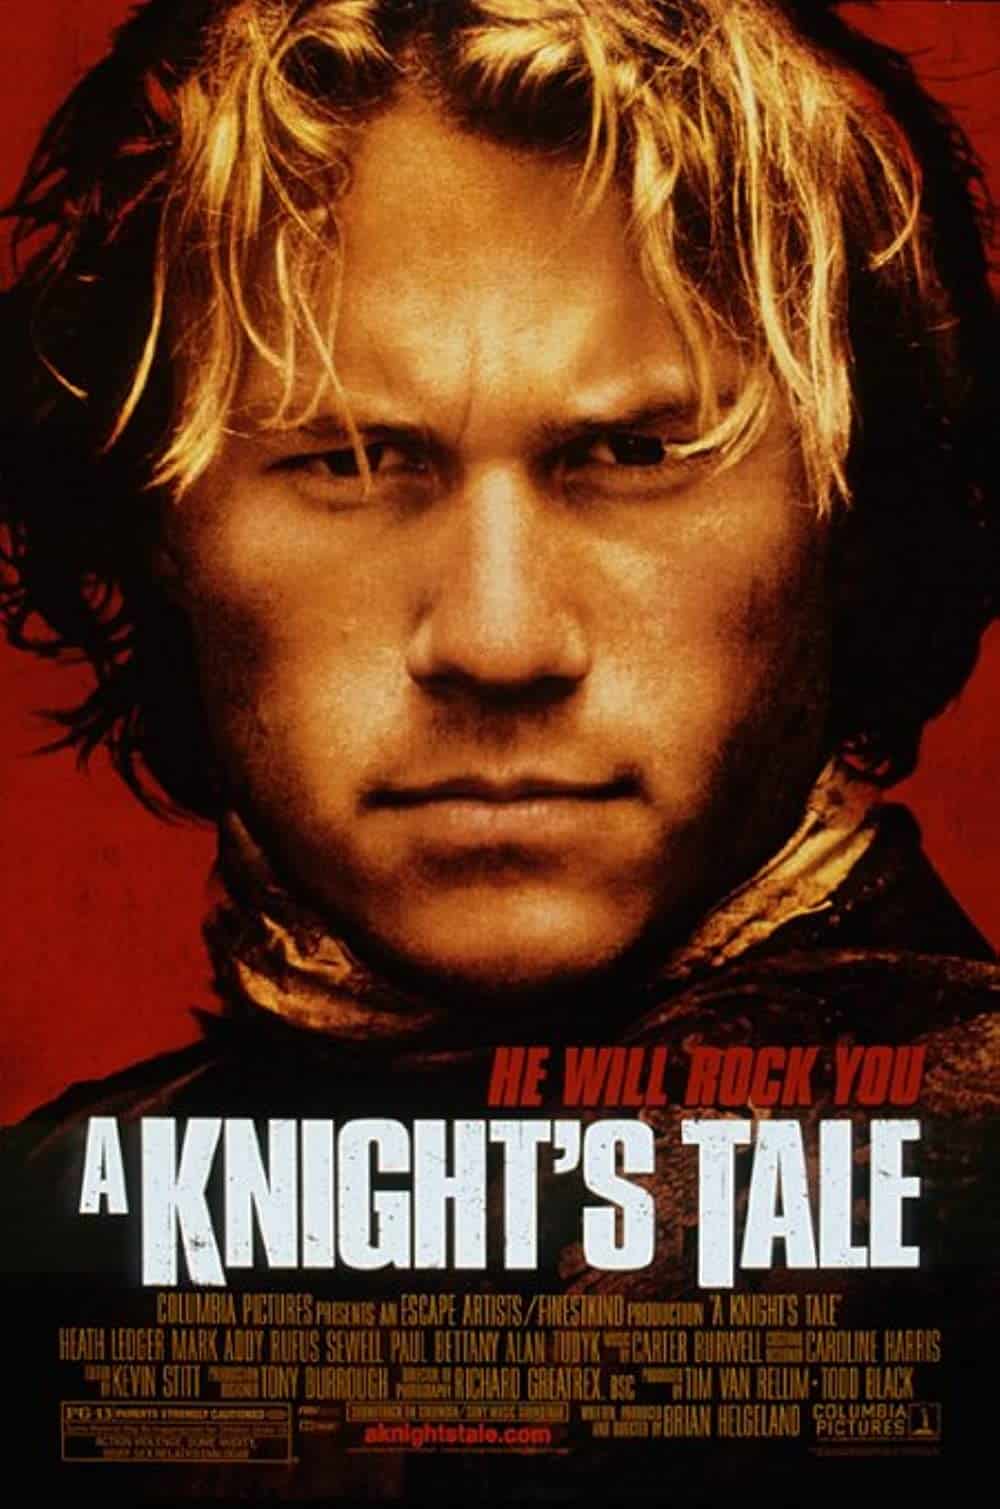 A Knight's Tale (2001) Best Knight Movies to Add in Your Watchlist